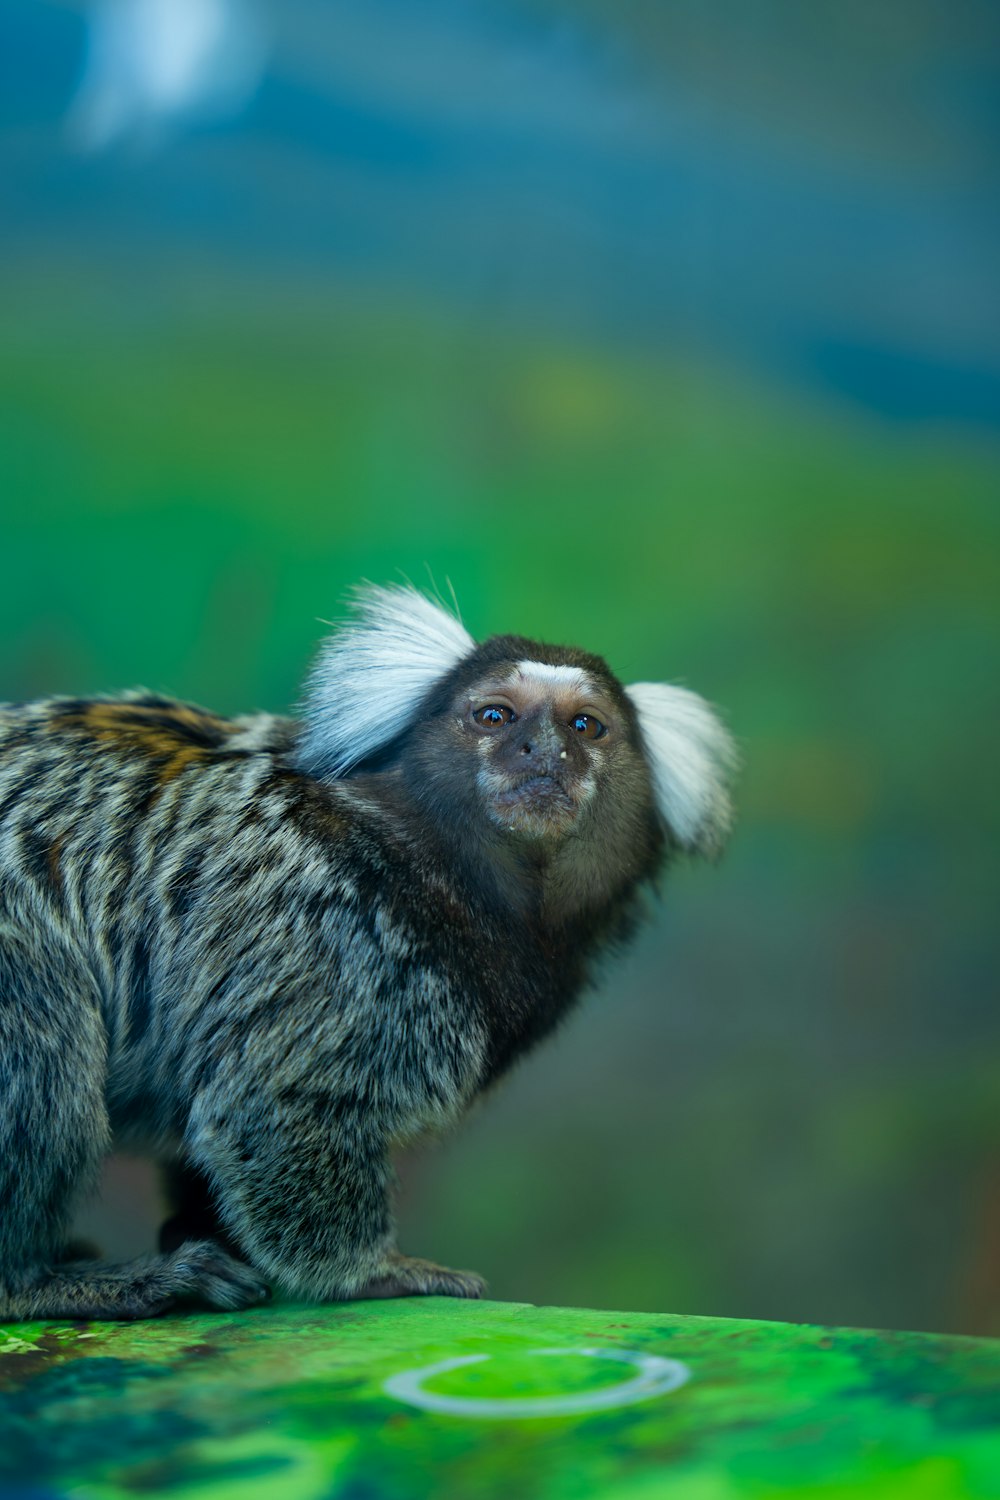 a small monkey with white hair standing on a rock